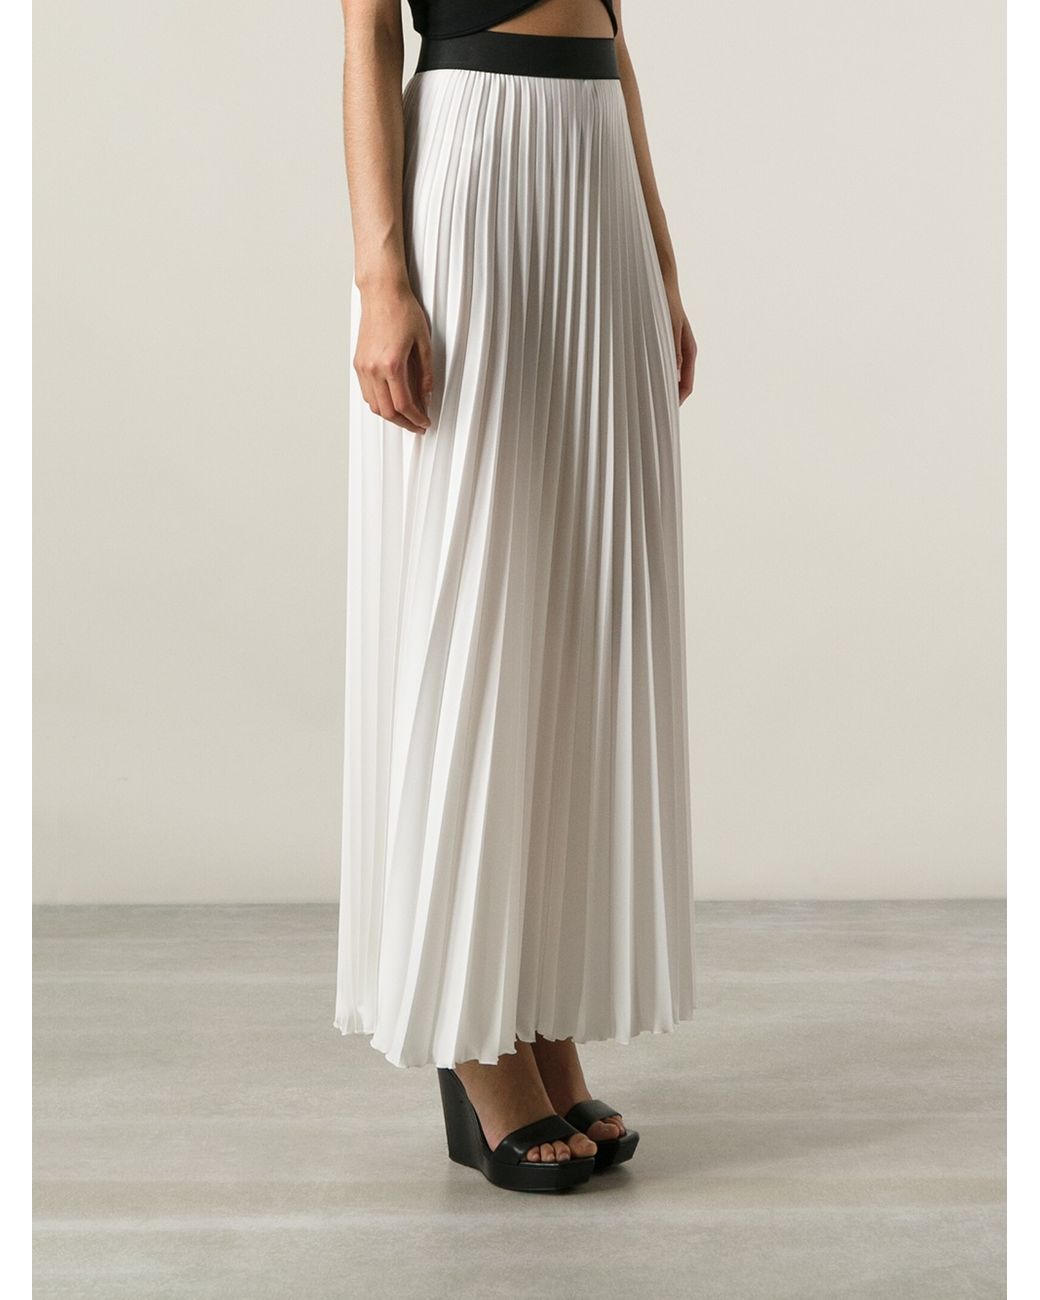 P.A.R.O.S.H. Long Pleated Skirt in White | Lyst